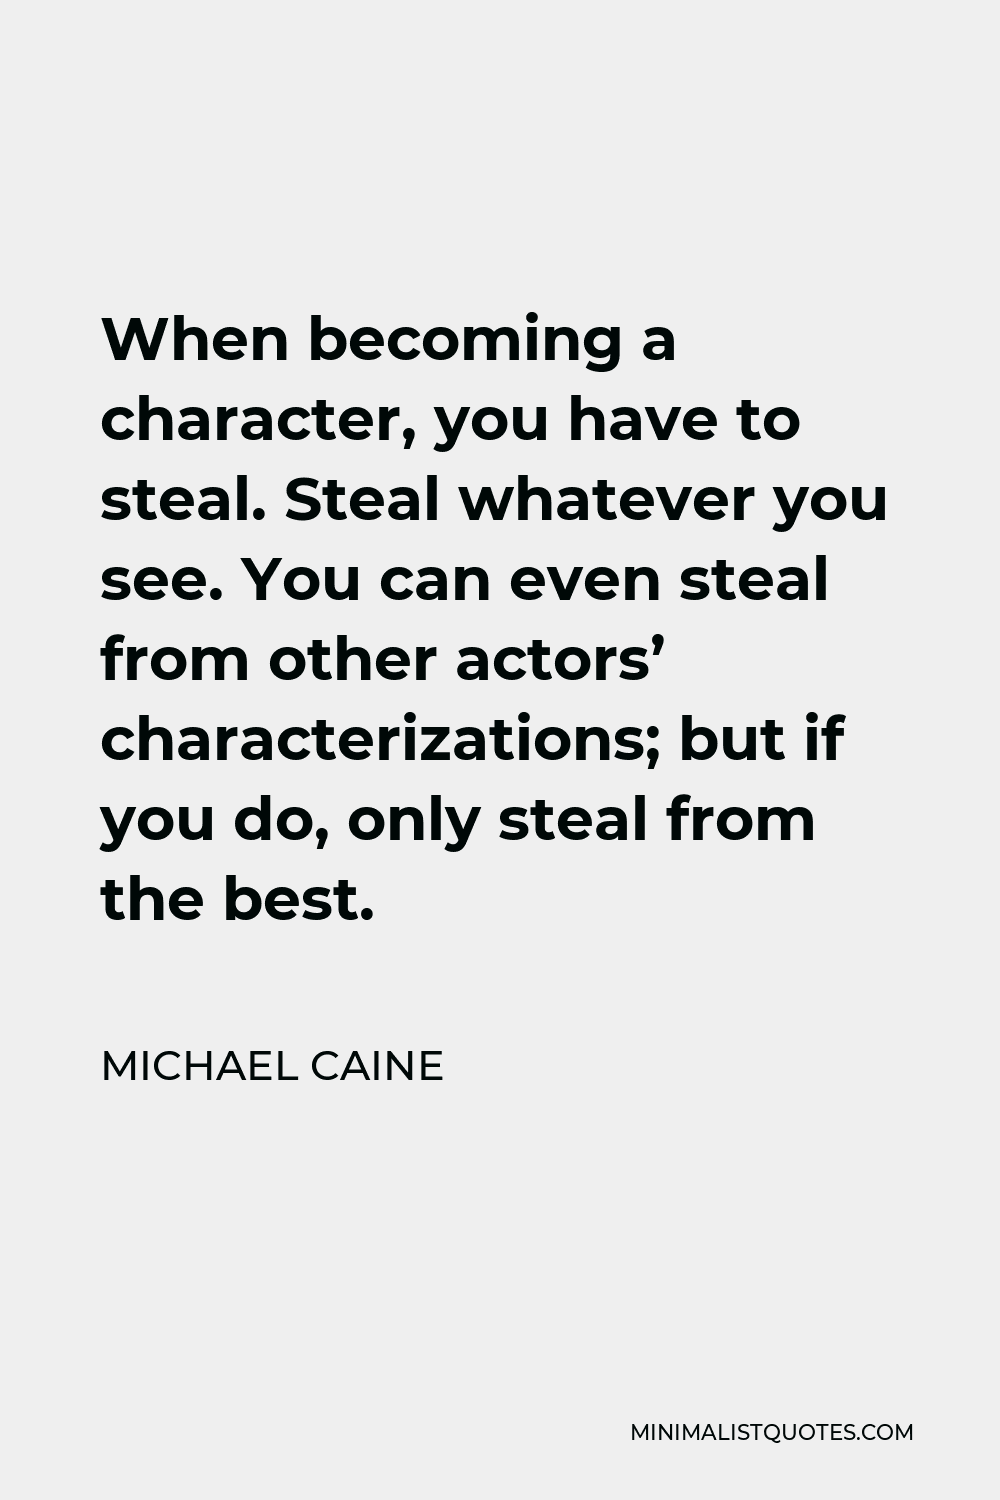 Michael Caine Quote - When becoming a character, you have to steal. Steal whatever you see. You can even steal from other actors’ characterizations; but if you do, only steal from the best.